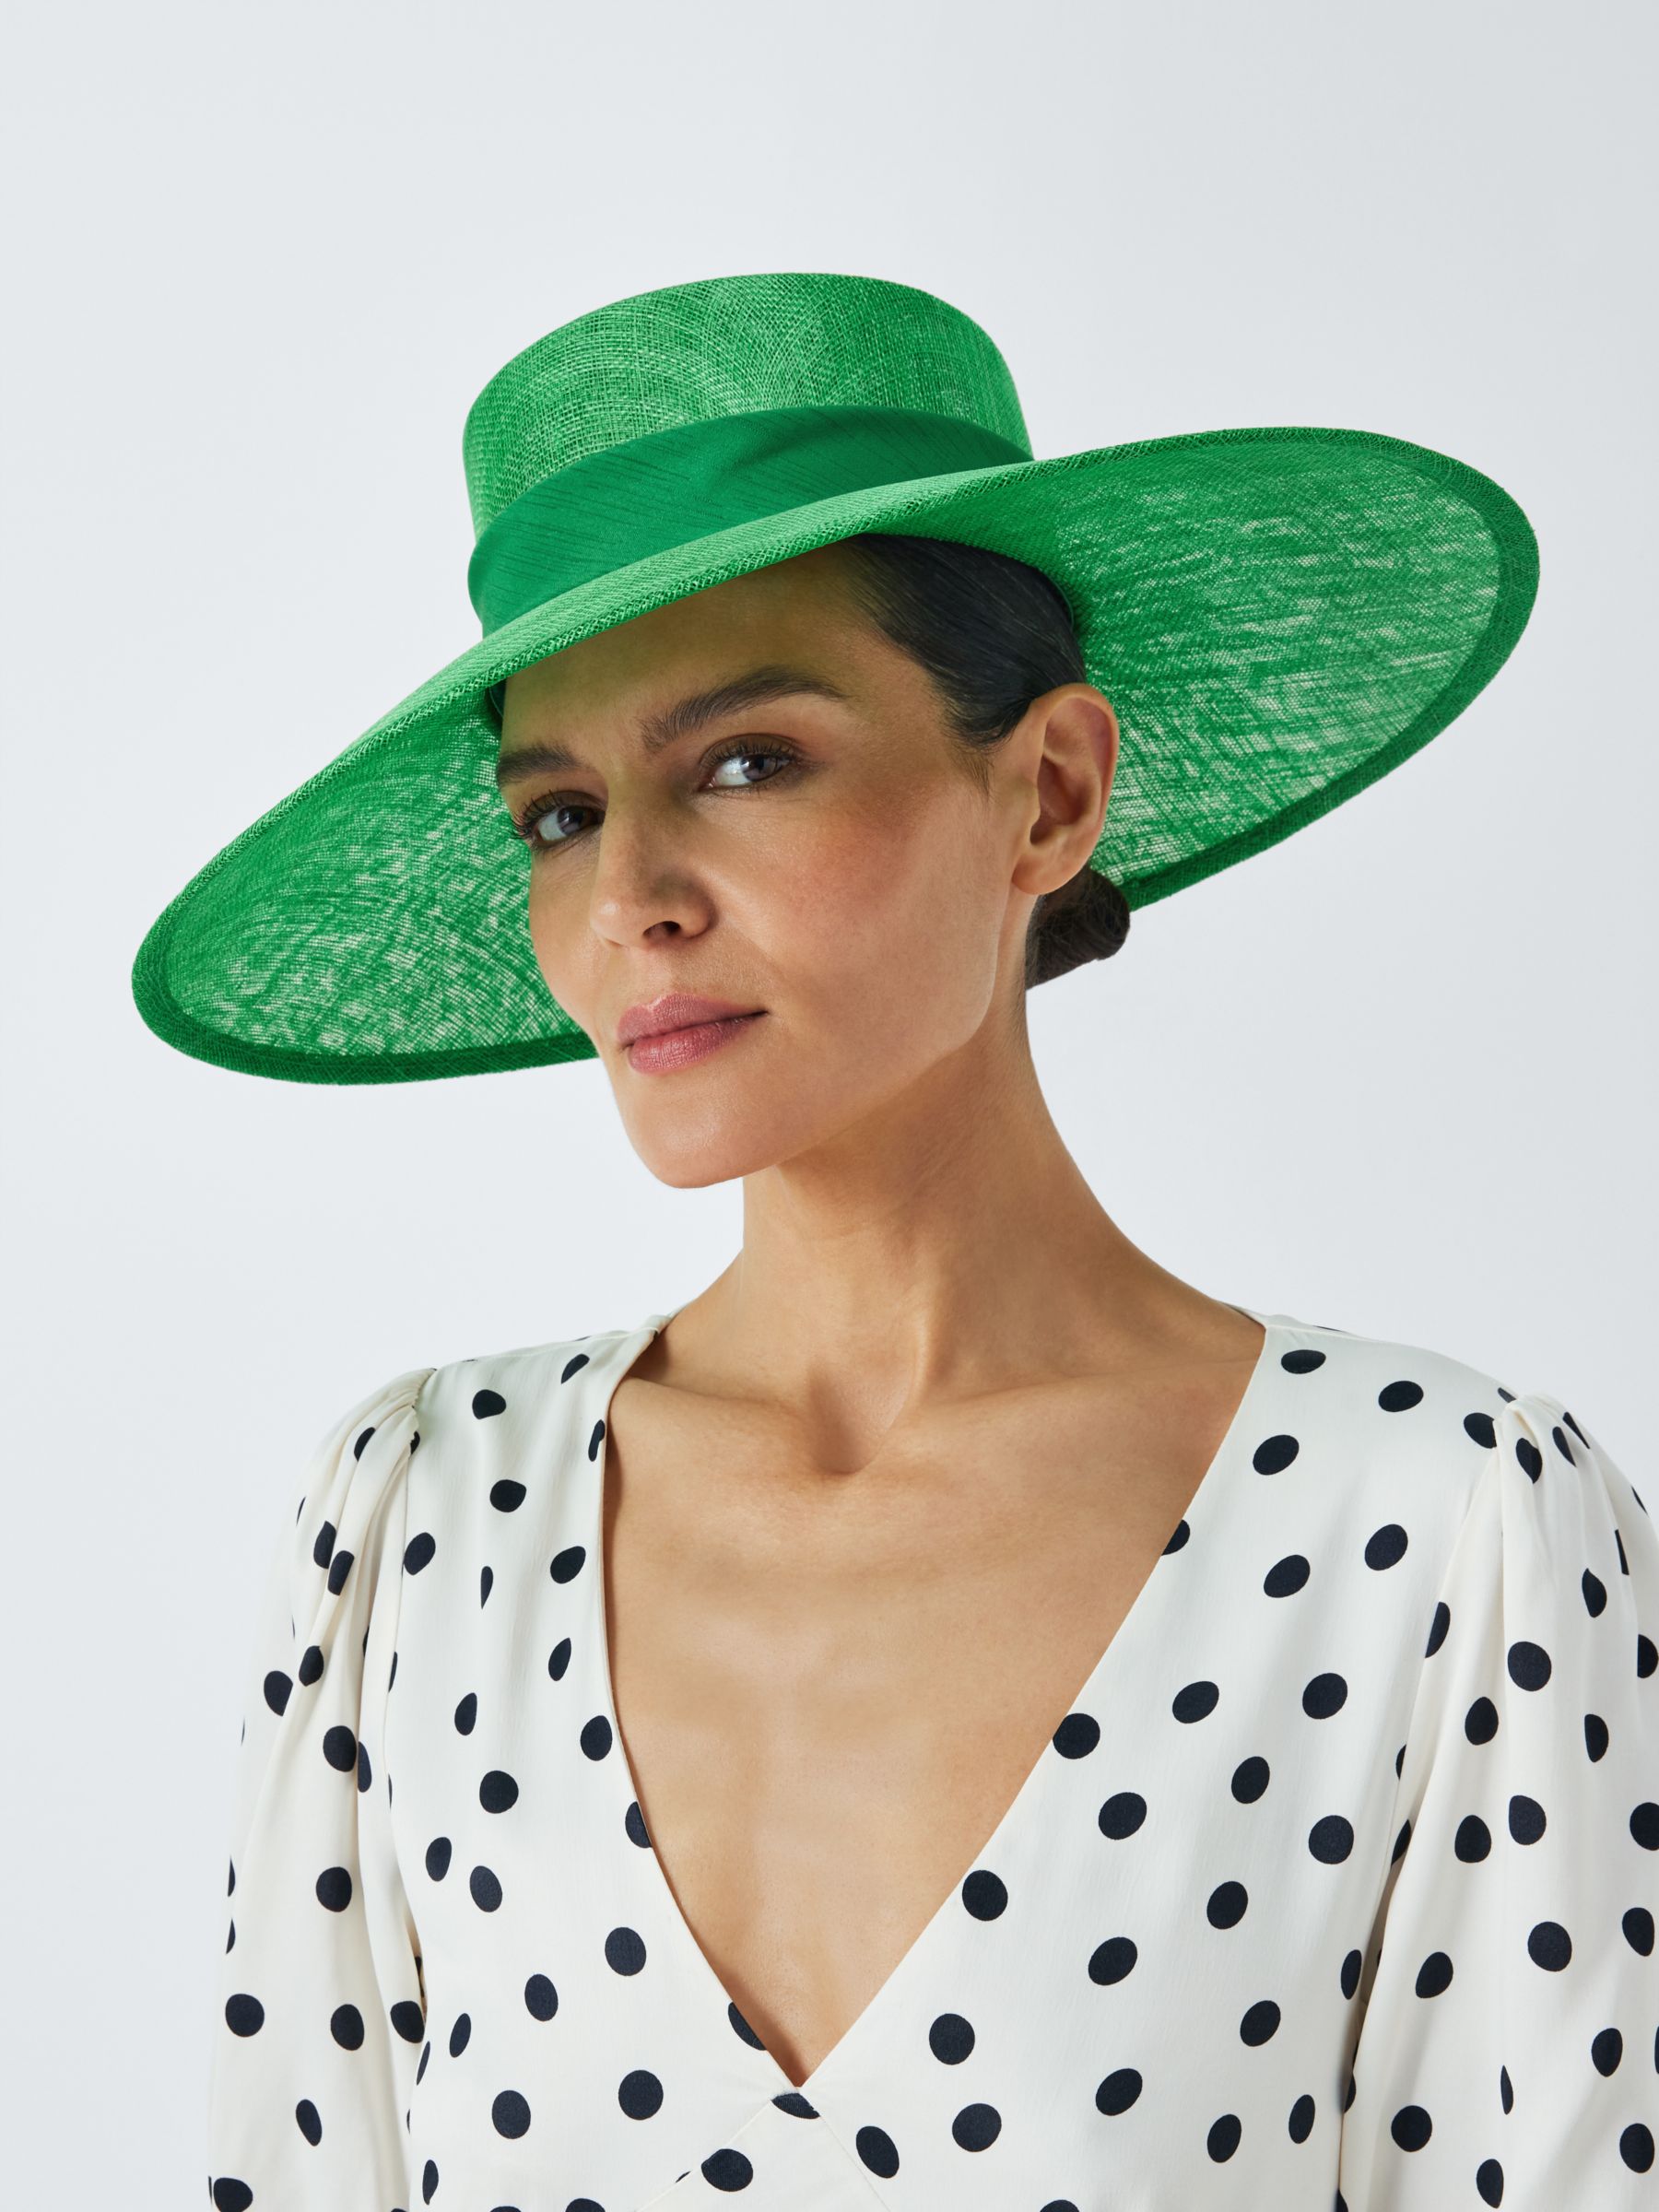 John Lewis Katy Boater Occasion Hat, Green